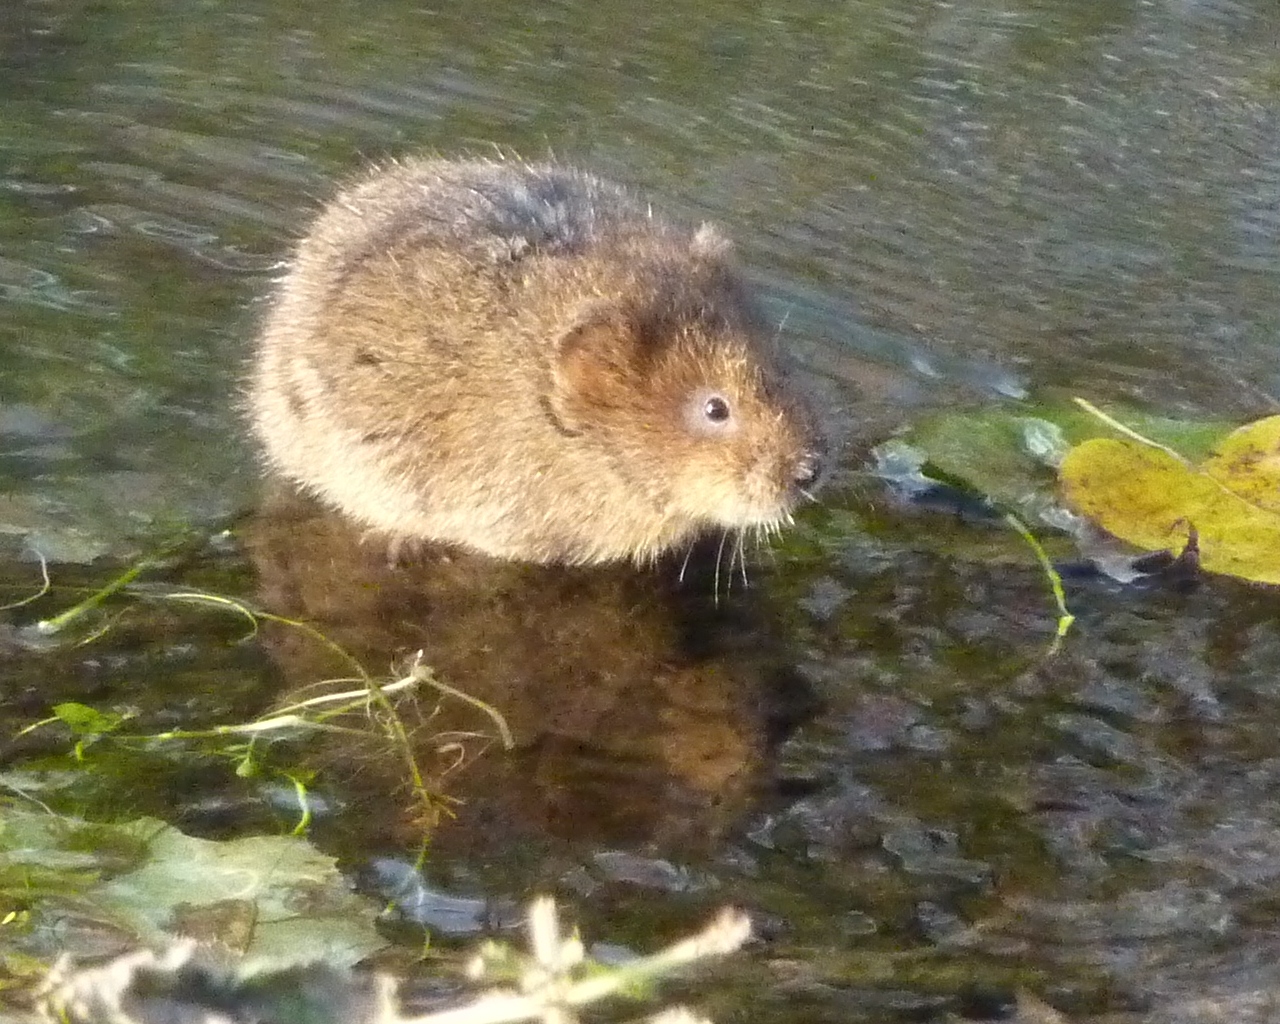 a rodent near the water in a shallow pool